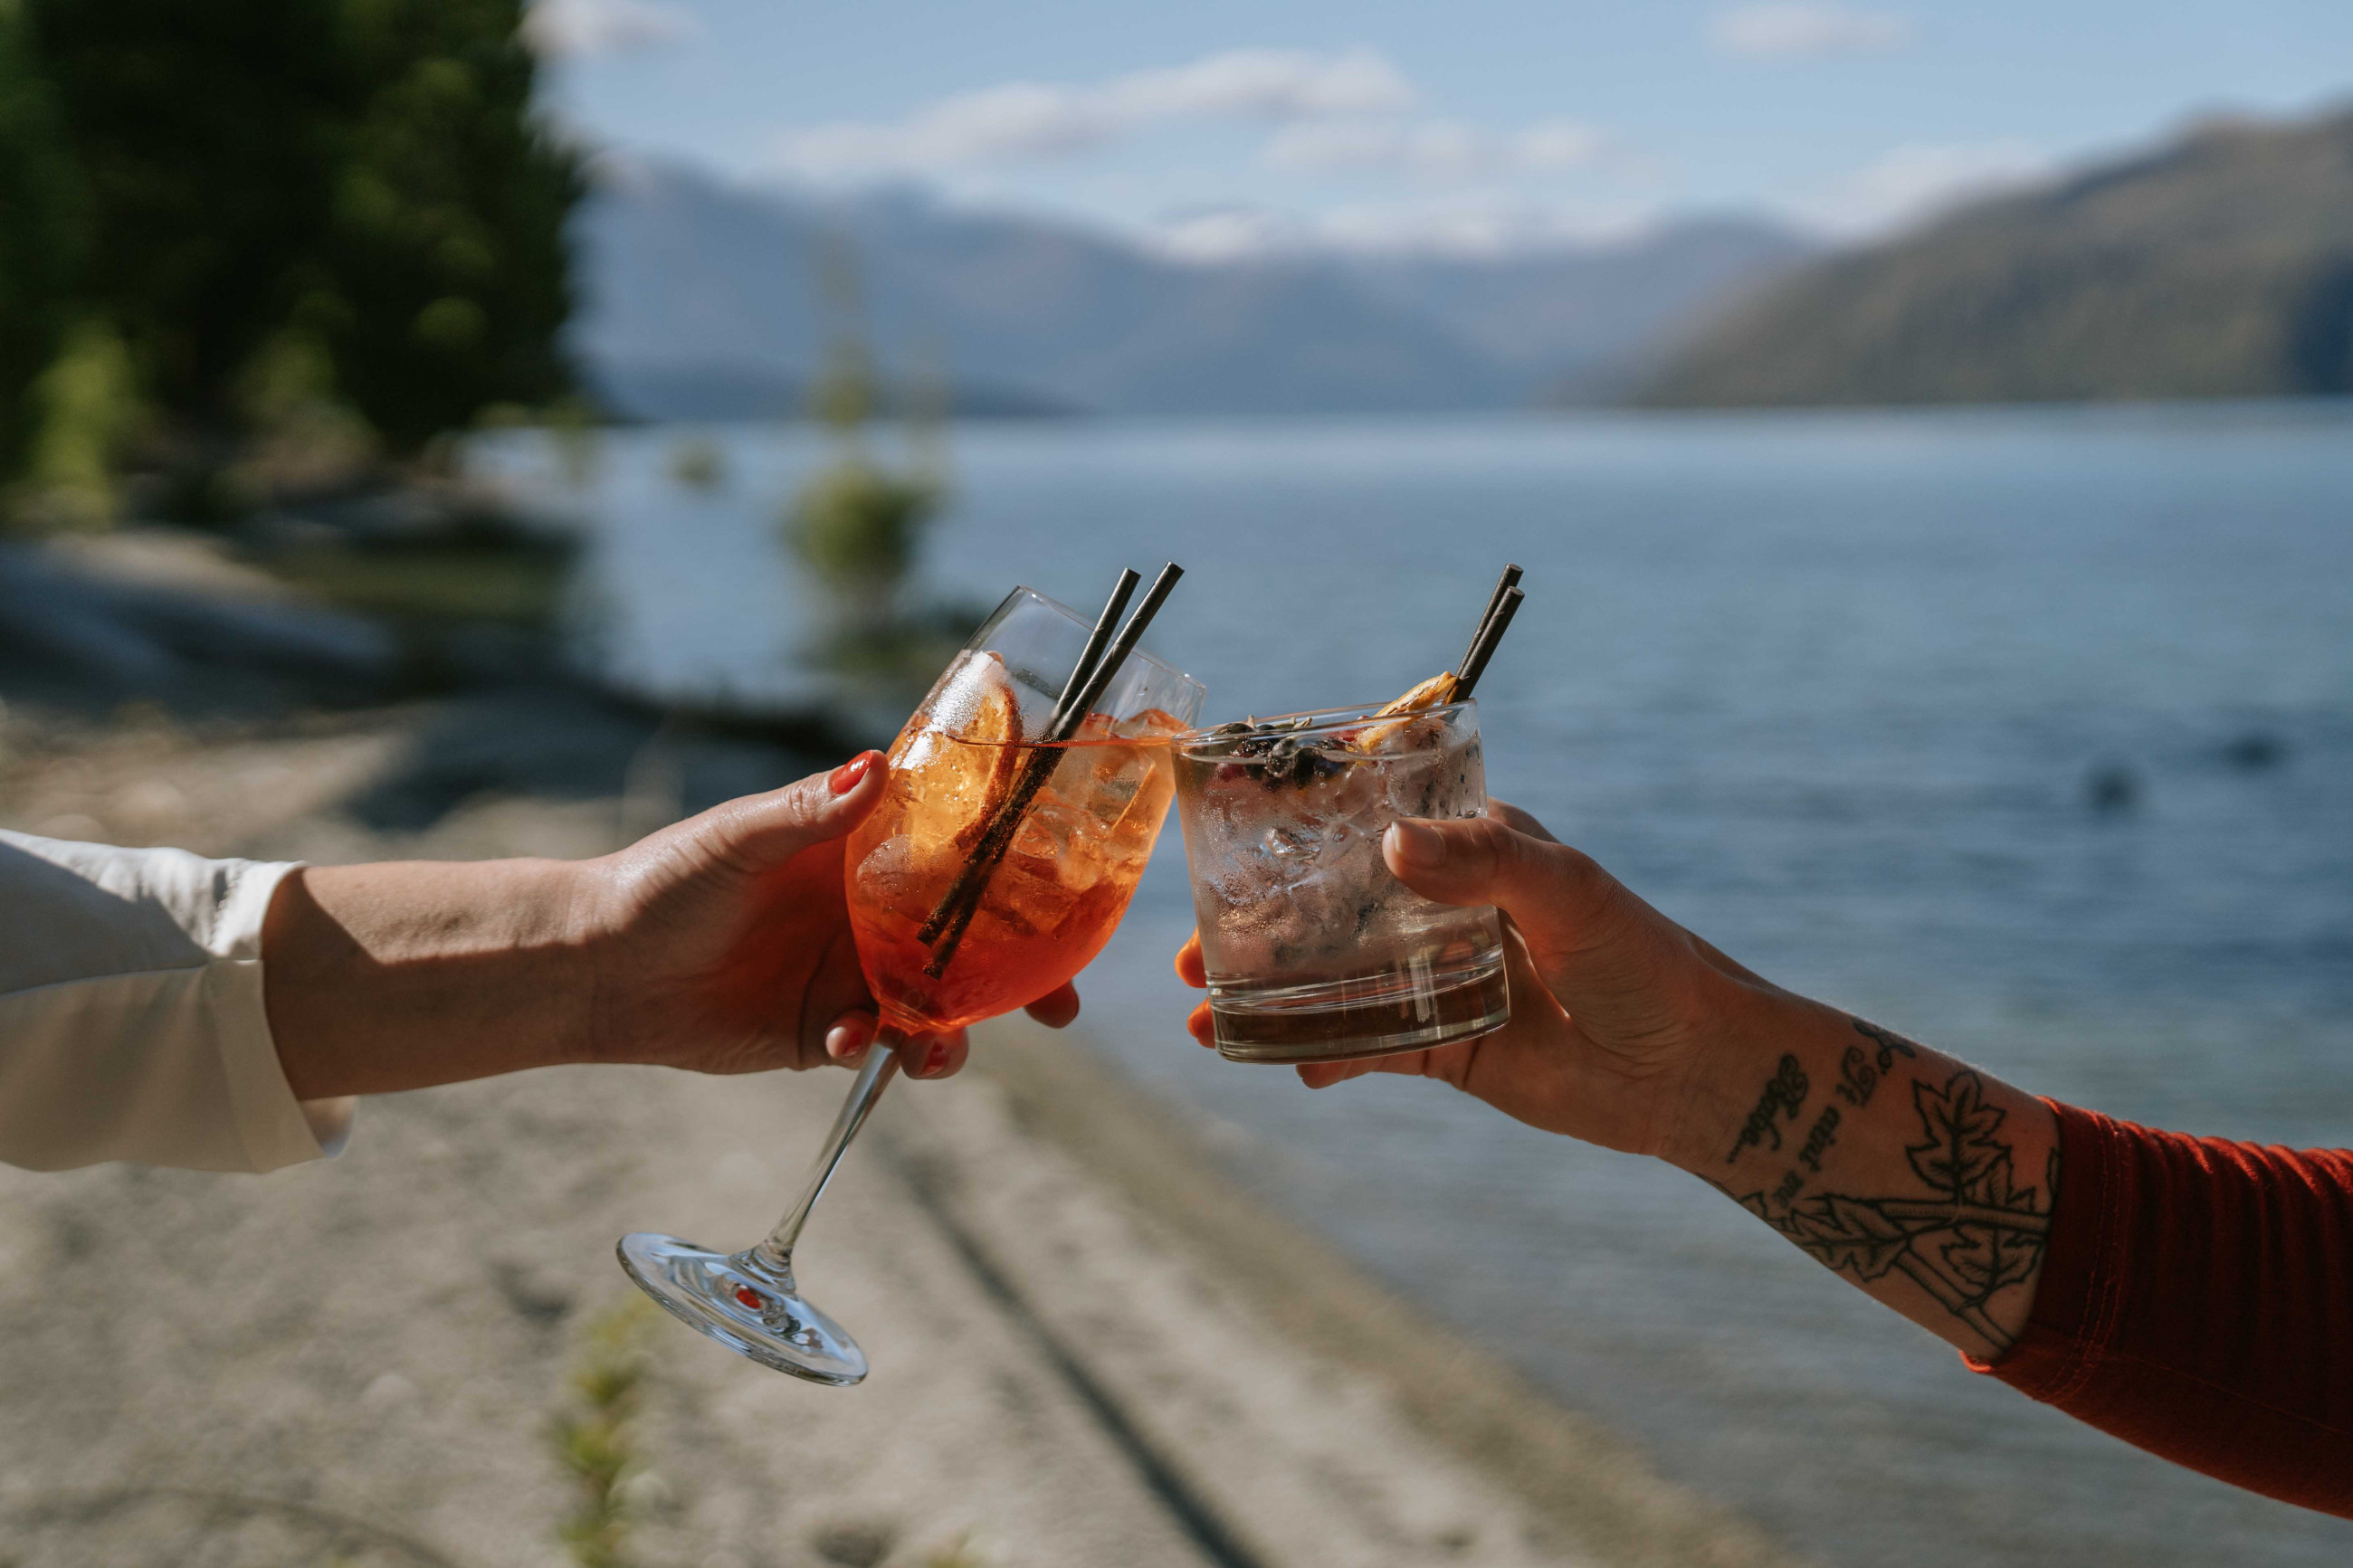 Looking for a great Wanaka dinner menu? Edgewater Hotel Wanaka's dinner menu is available from 5pm daily.